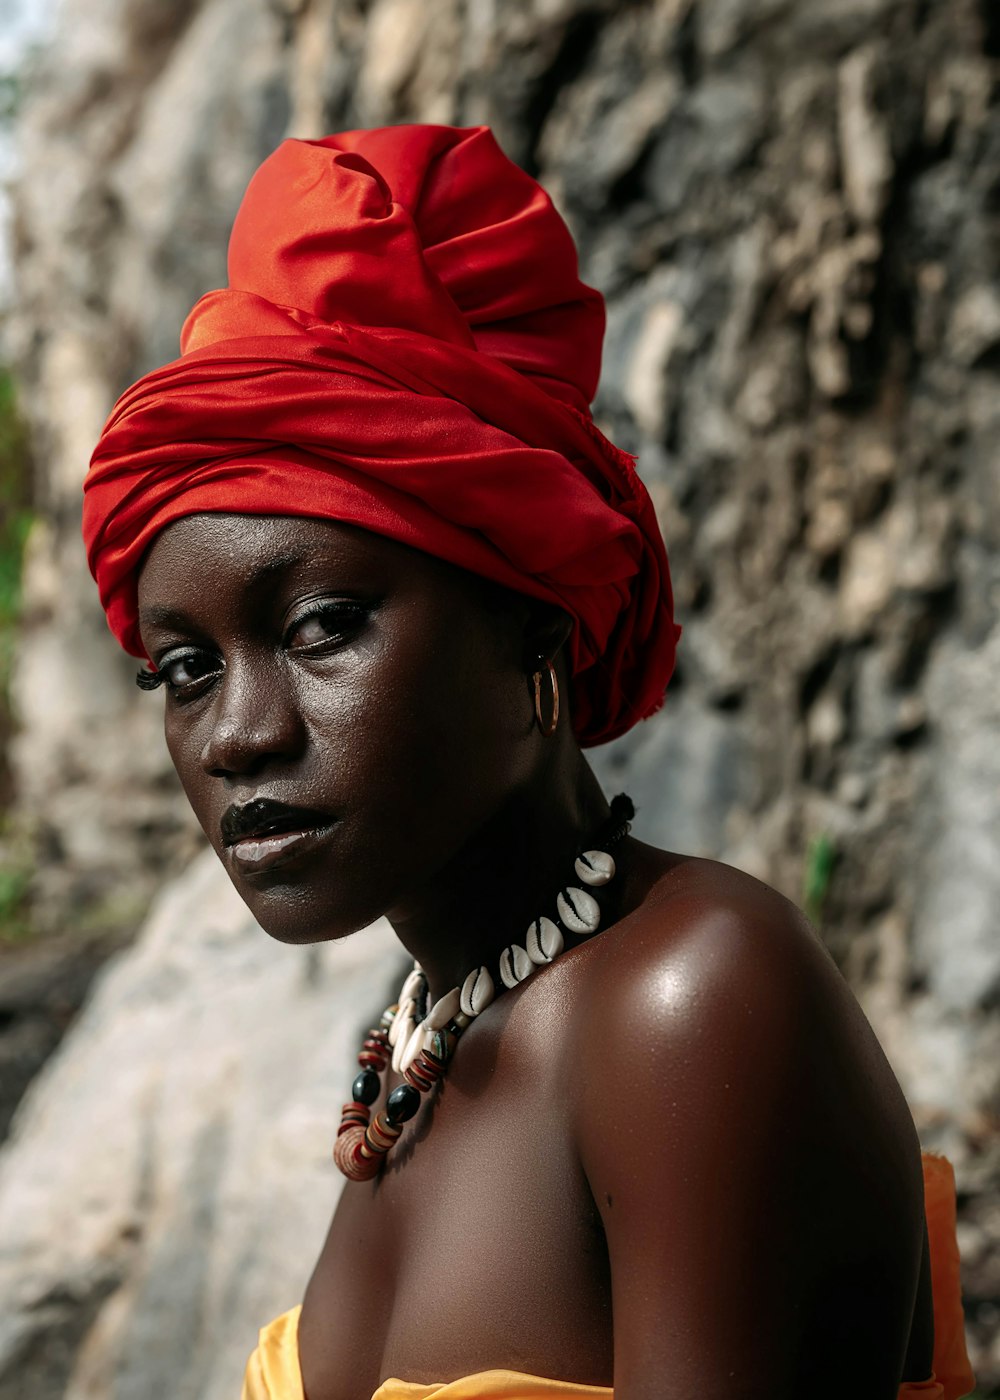 a woman with a red turban on her head